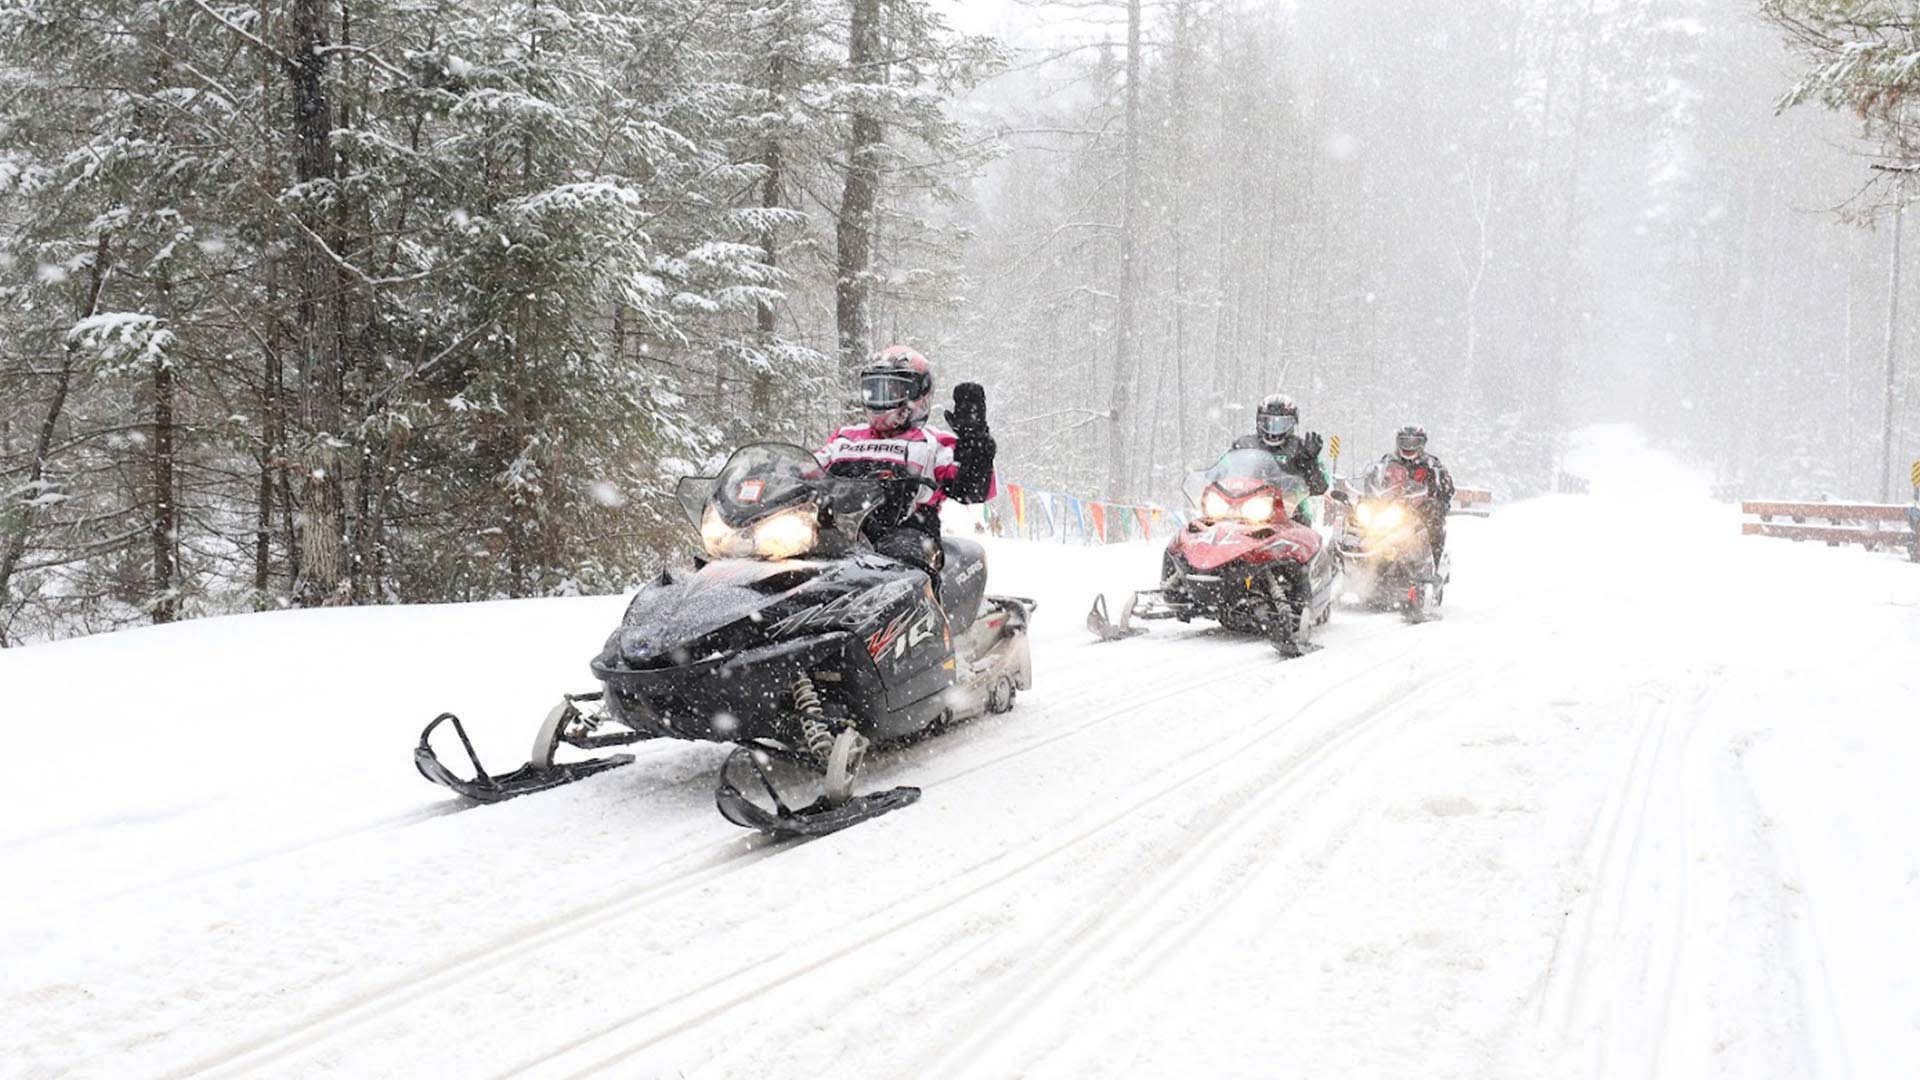 Group snowmobiling the trails